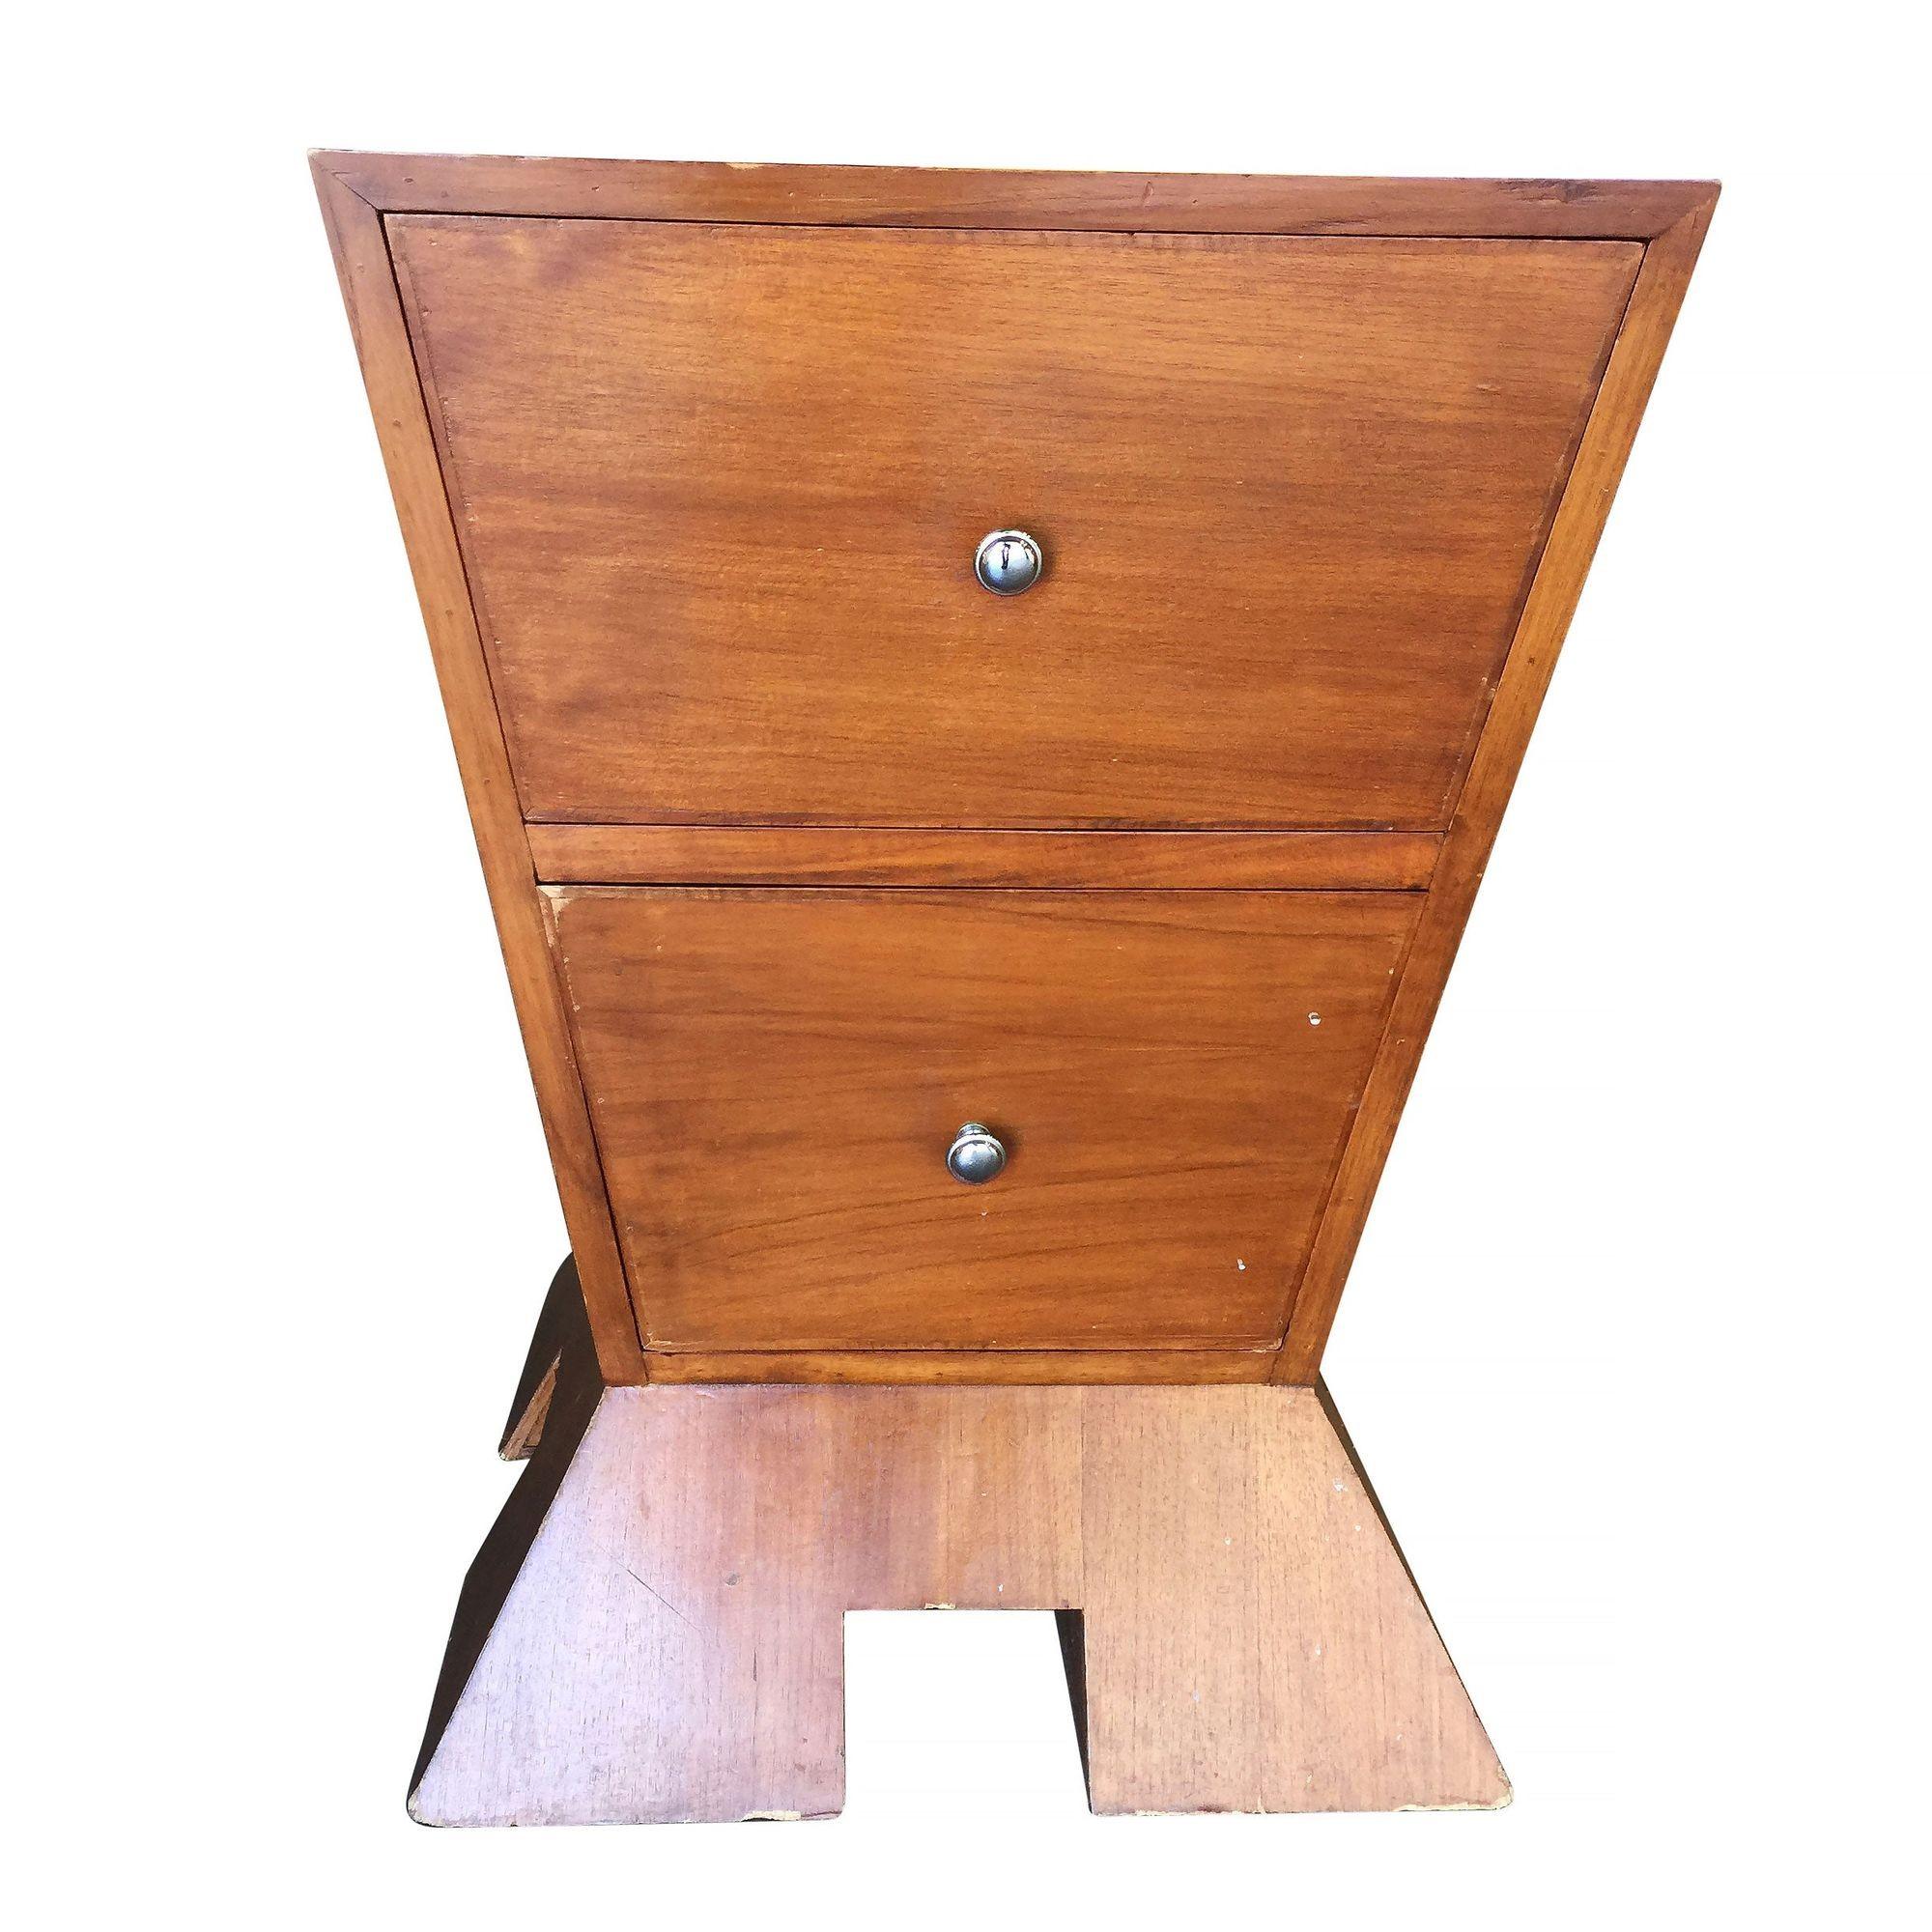 This avant-garde nightstand redefines modernism with its striking inverted triangle design resting atop a triangular base. Equipped with two drawers adorned with sleek round pulls, it seamlessly combines functionality with cutting-edge aesthetics,